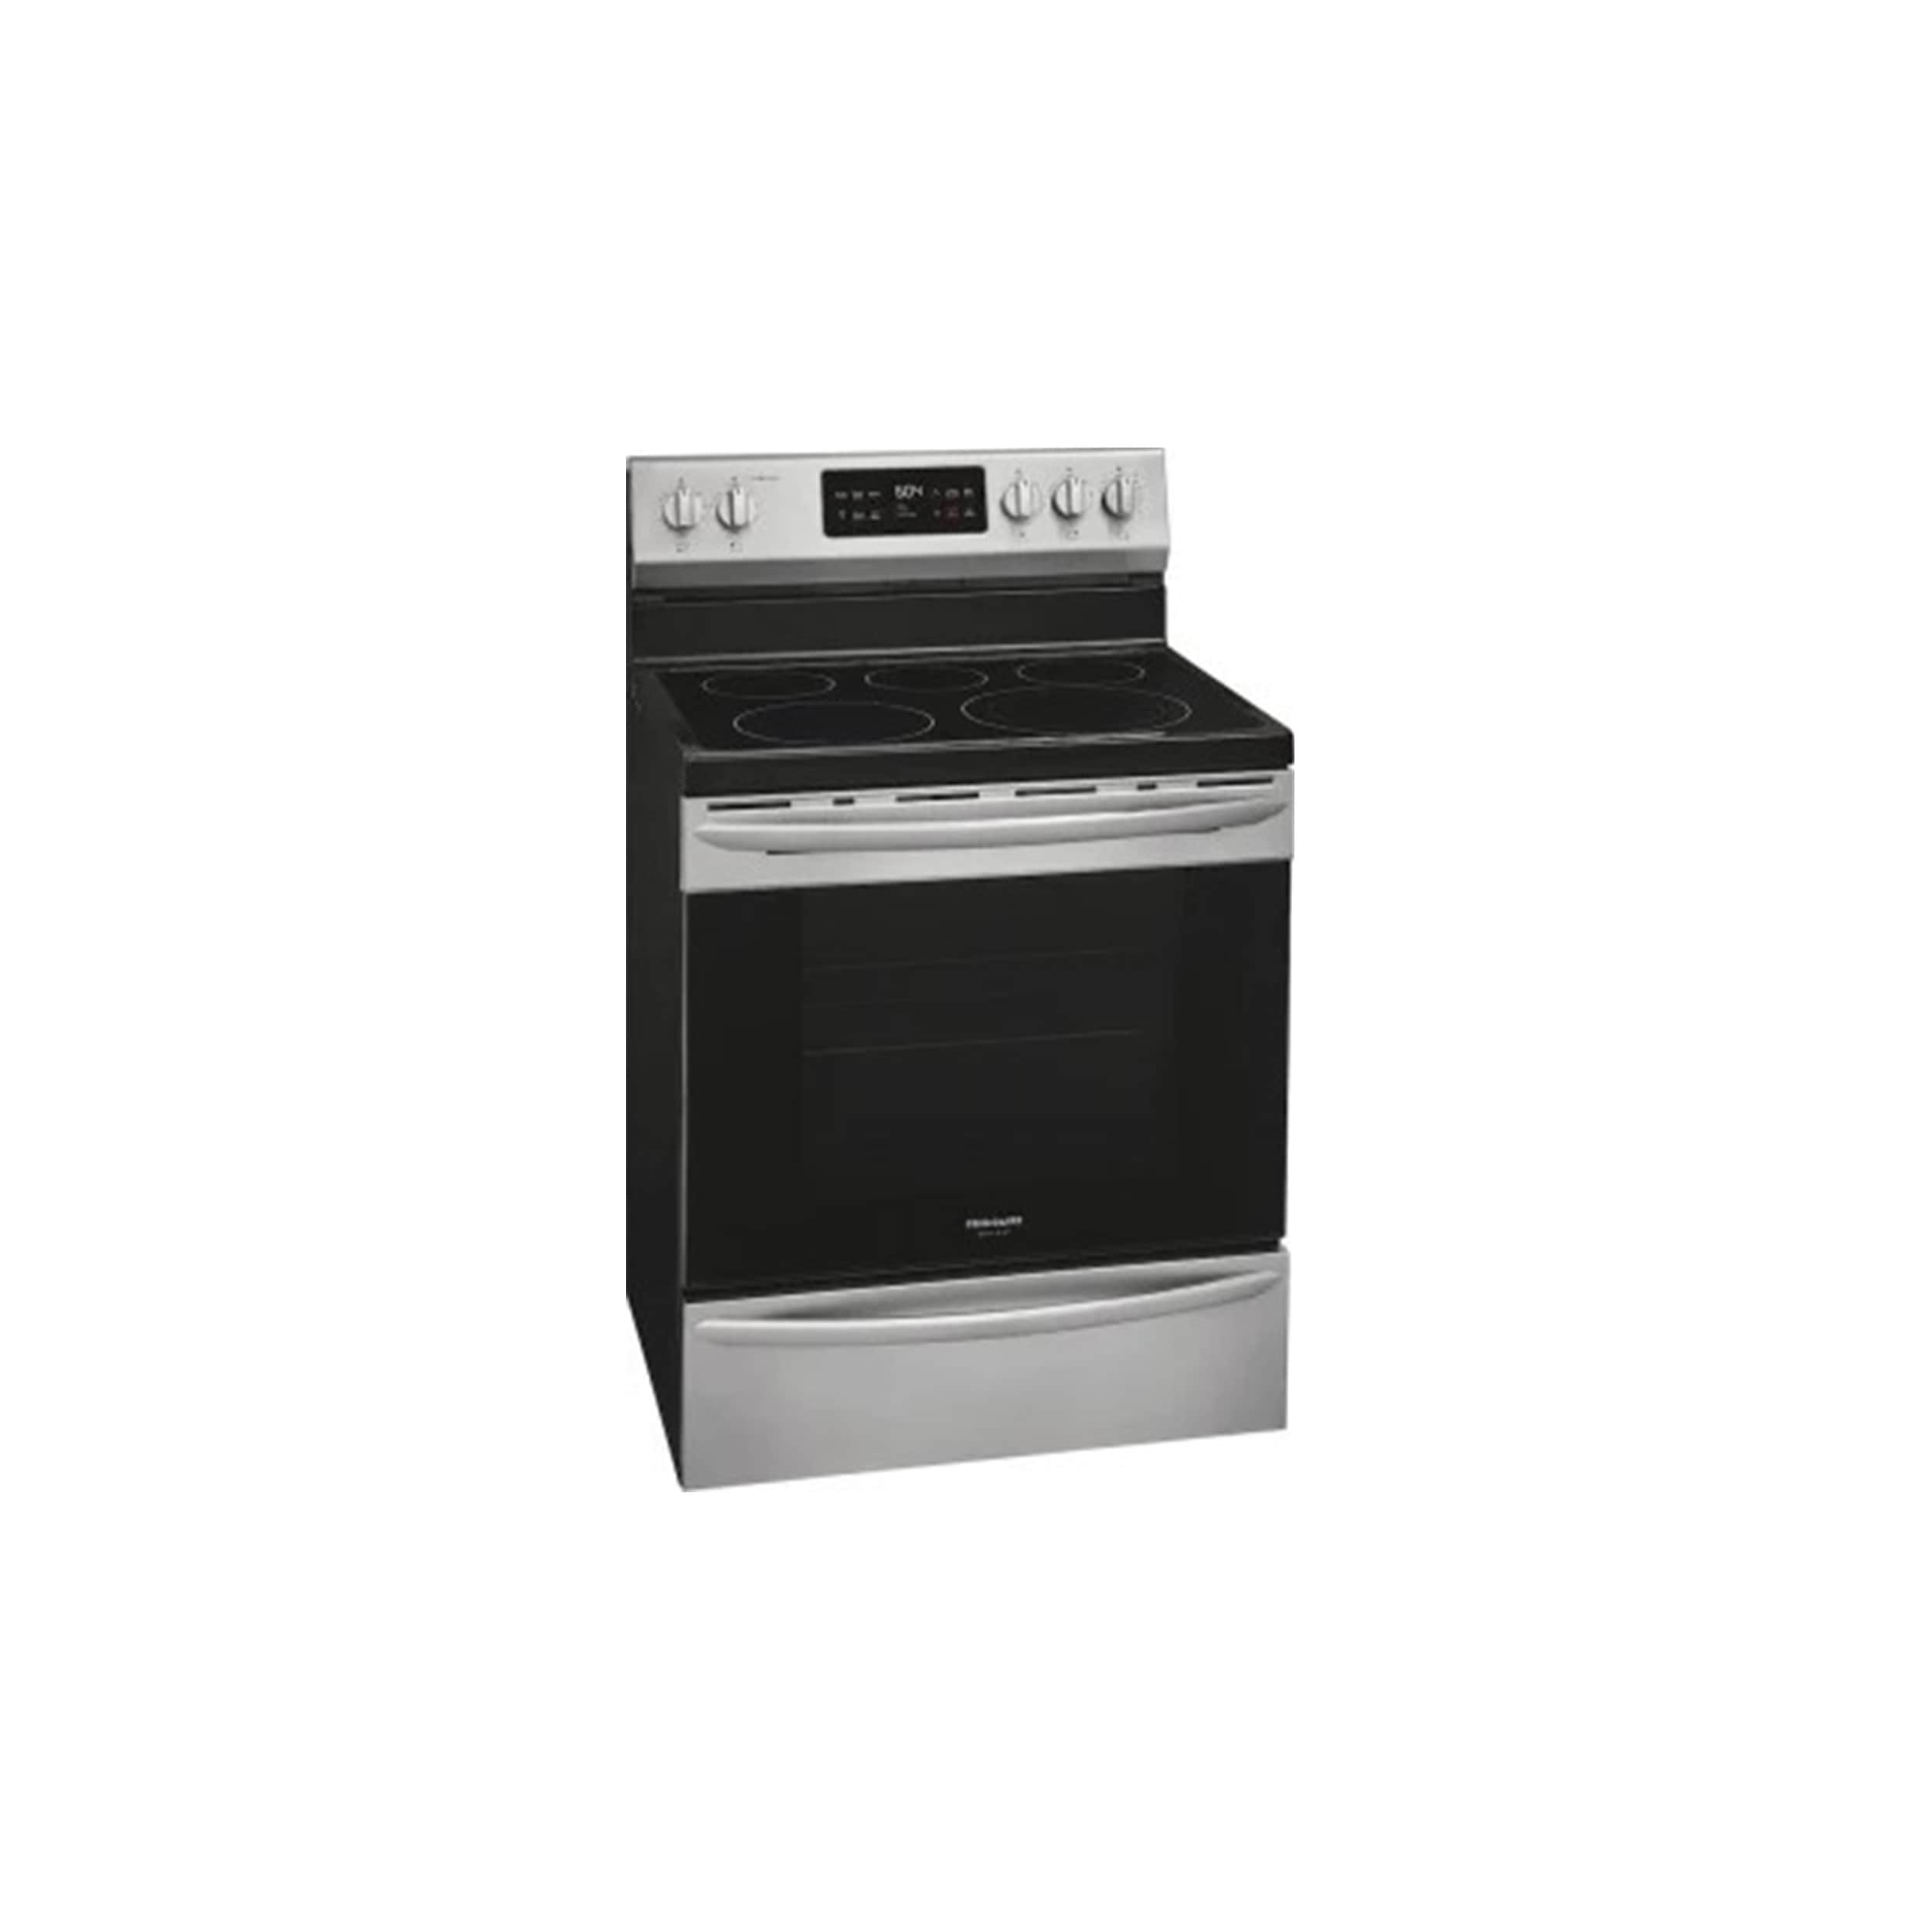 Frigidaire 30 inch Freestand inchg Electric Range with Steam Clean